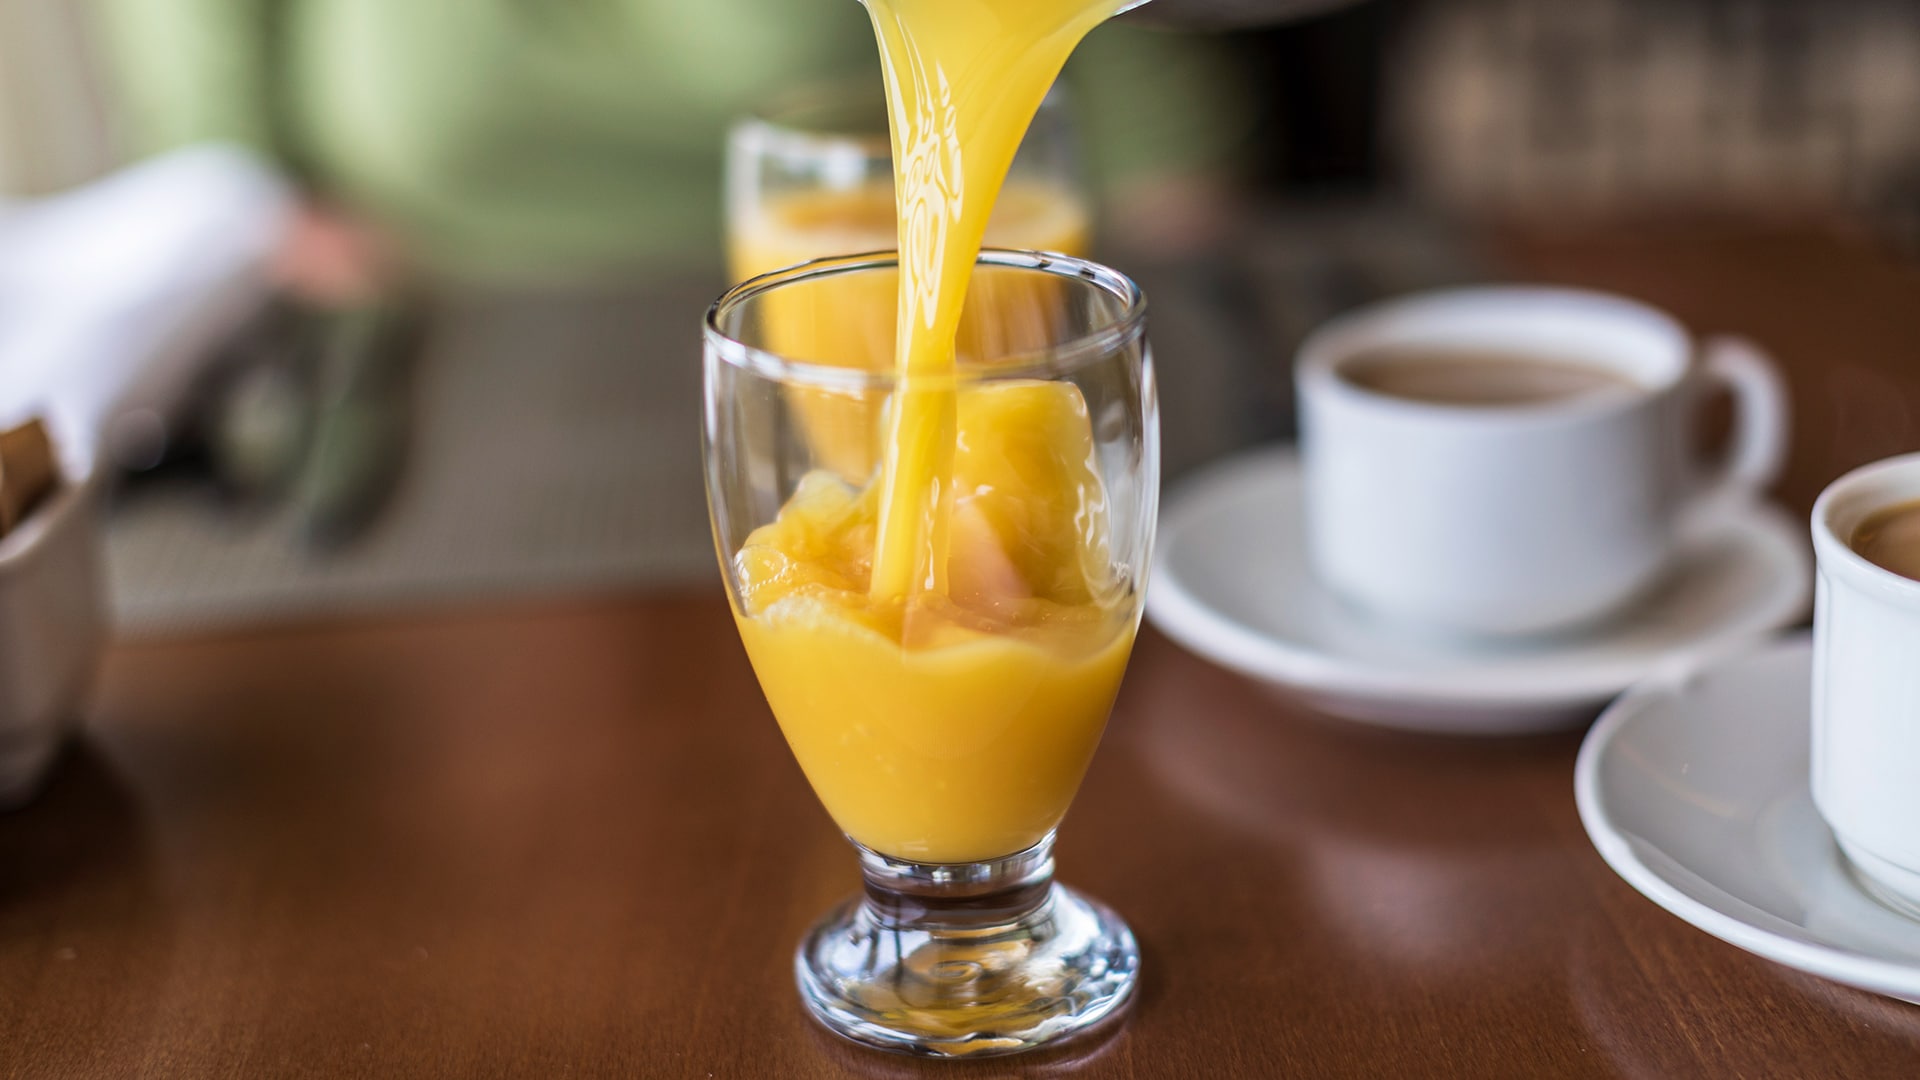 Orange juice being poured in a glass